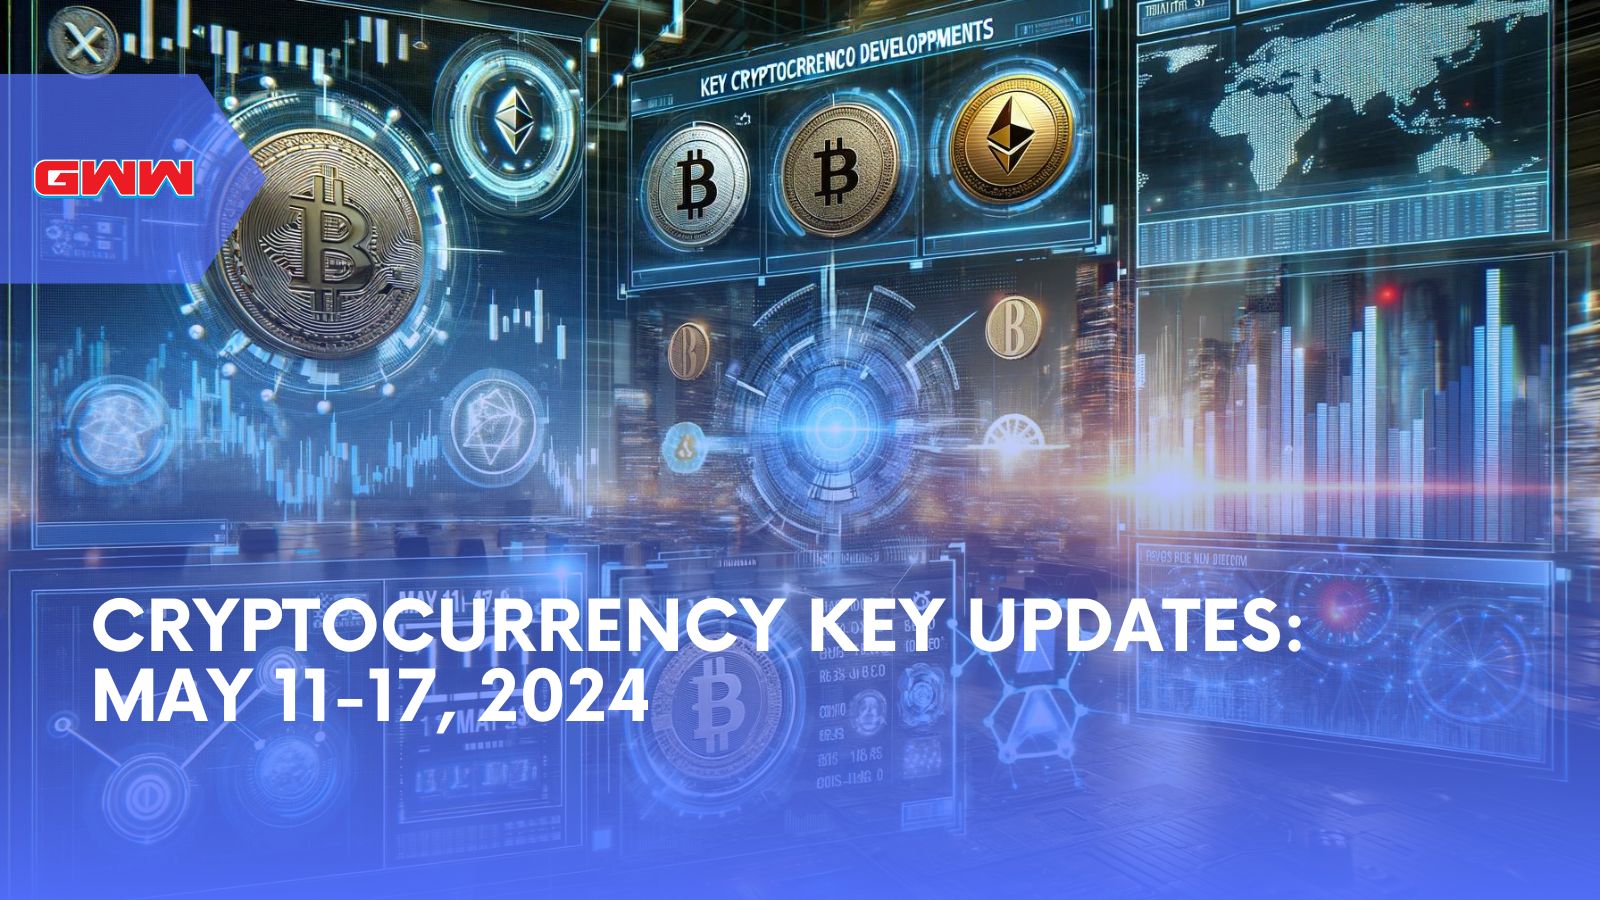 Cryptocurrency Key Updates: May 11-17, 2024